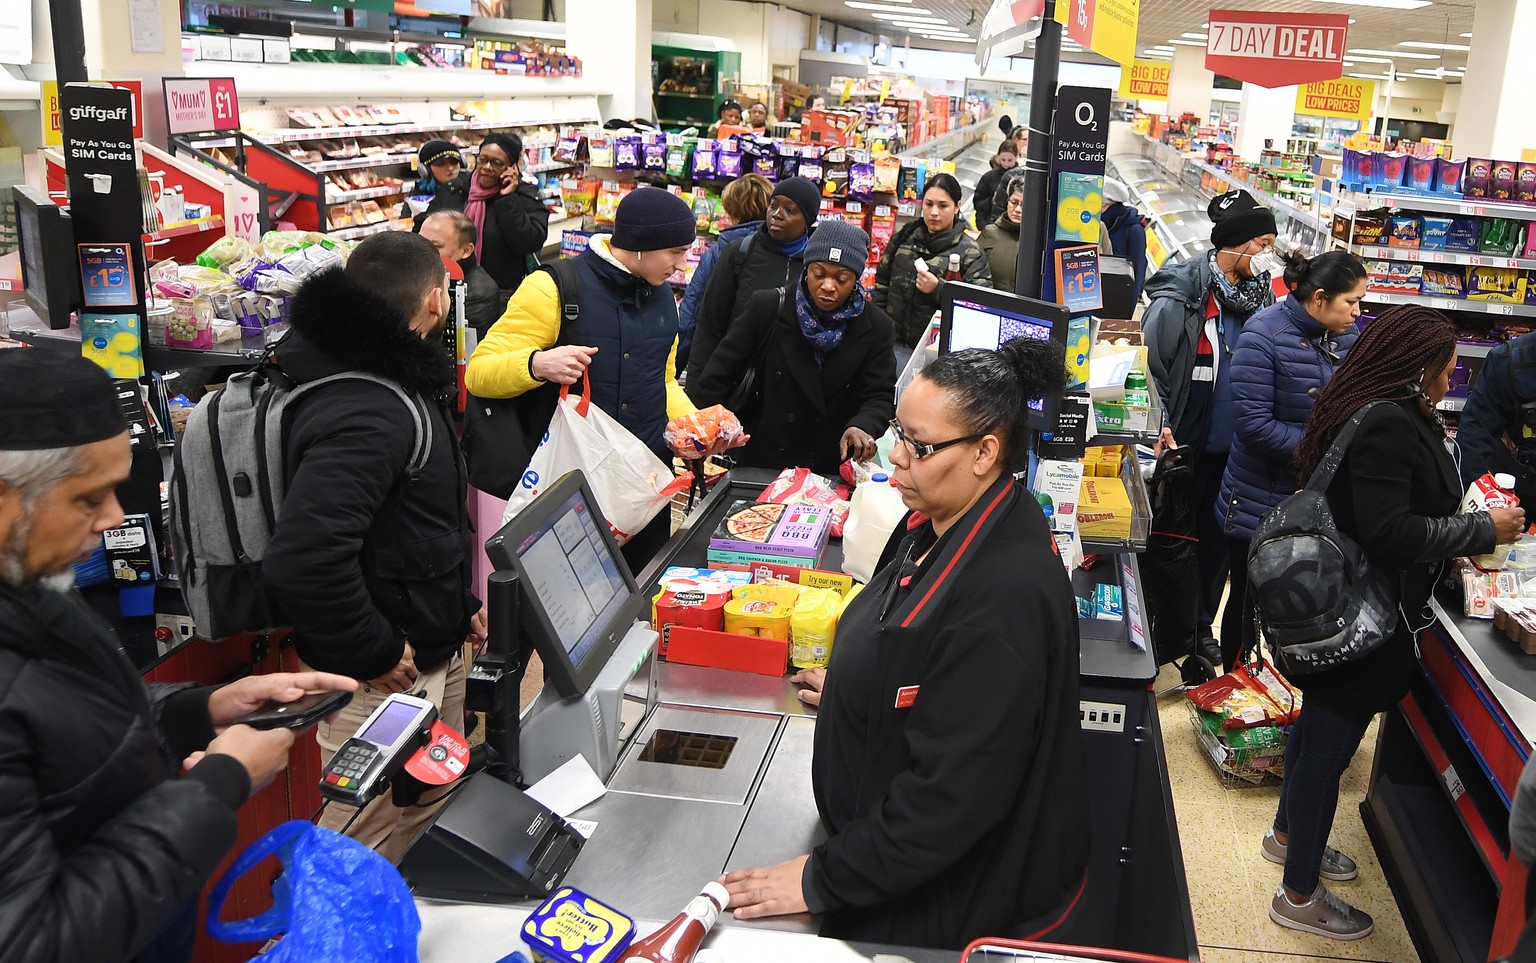 epa08306396 People queue at a supermarket in London, Britain, 19 March 2020. The UK&#039;s major supermarkets have requested police protection over fears coronavirus panic-buying could lead to rioting ...